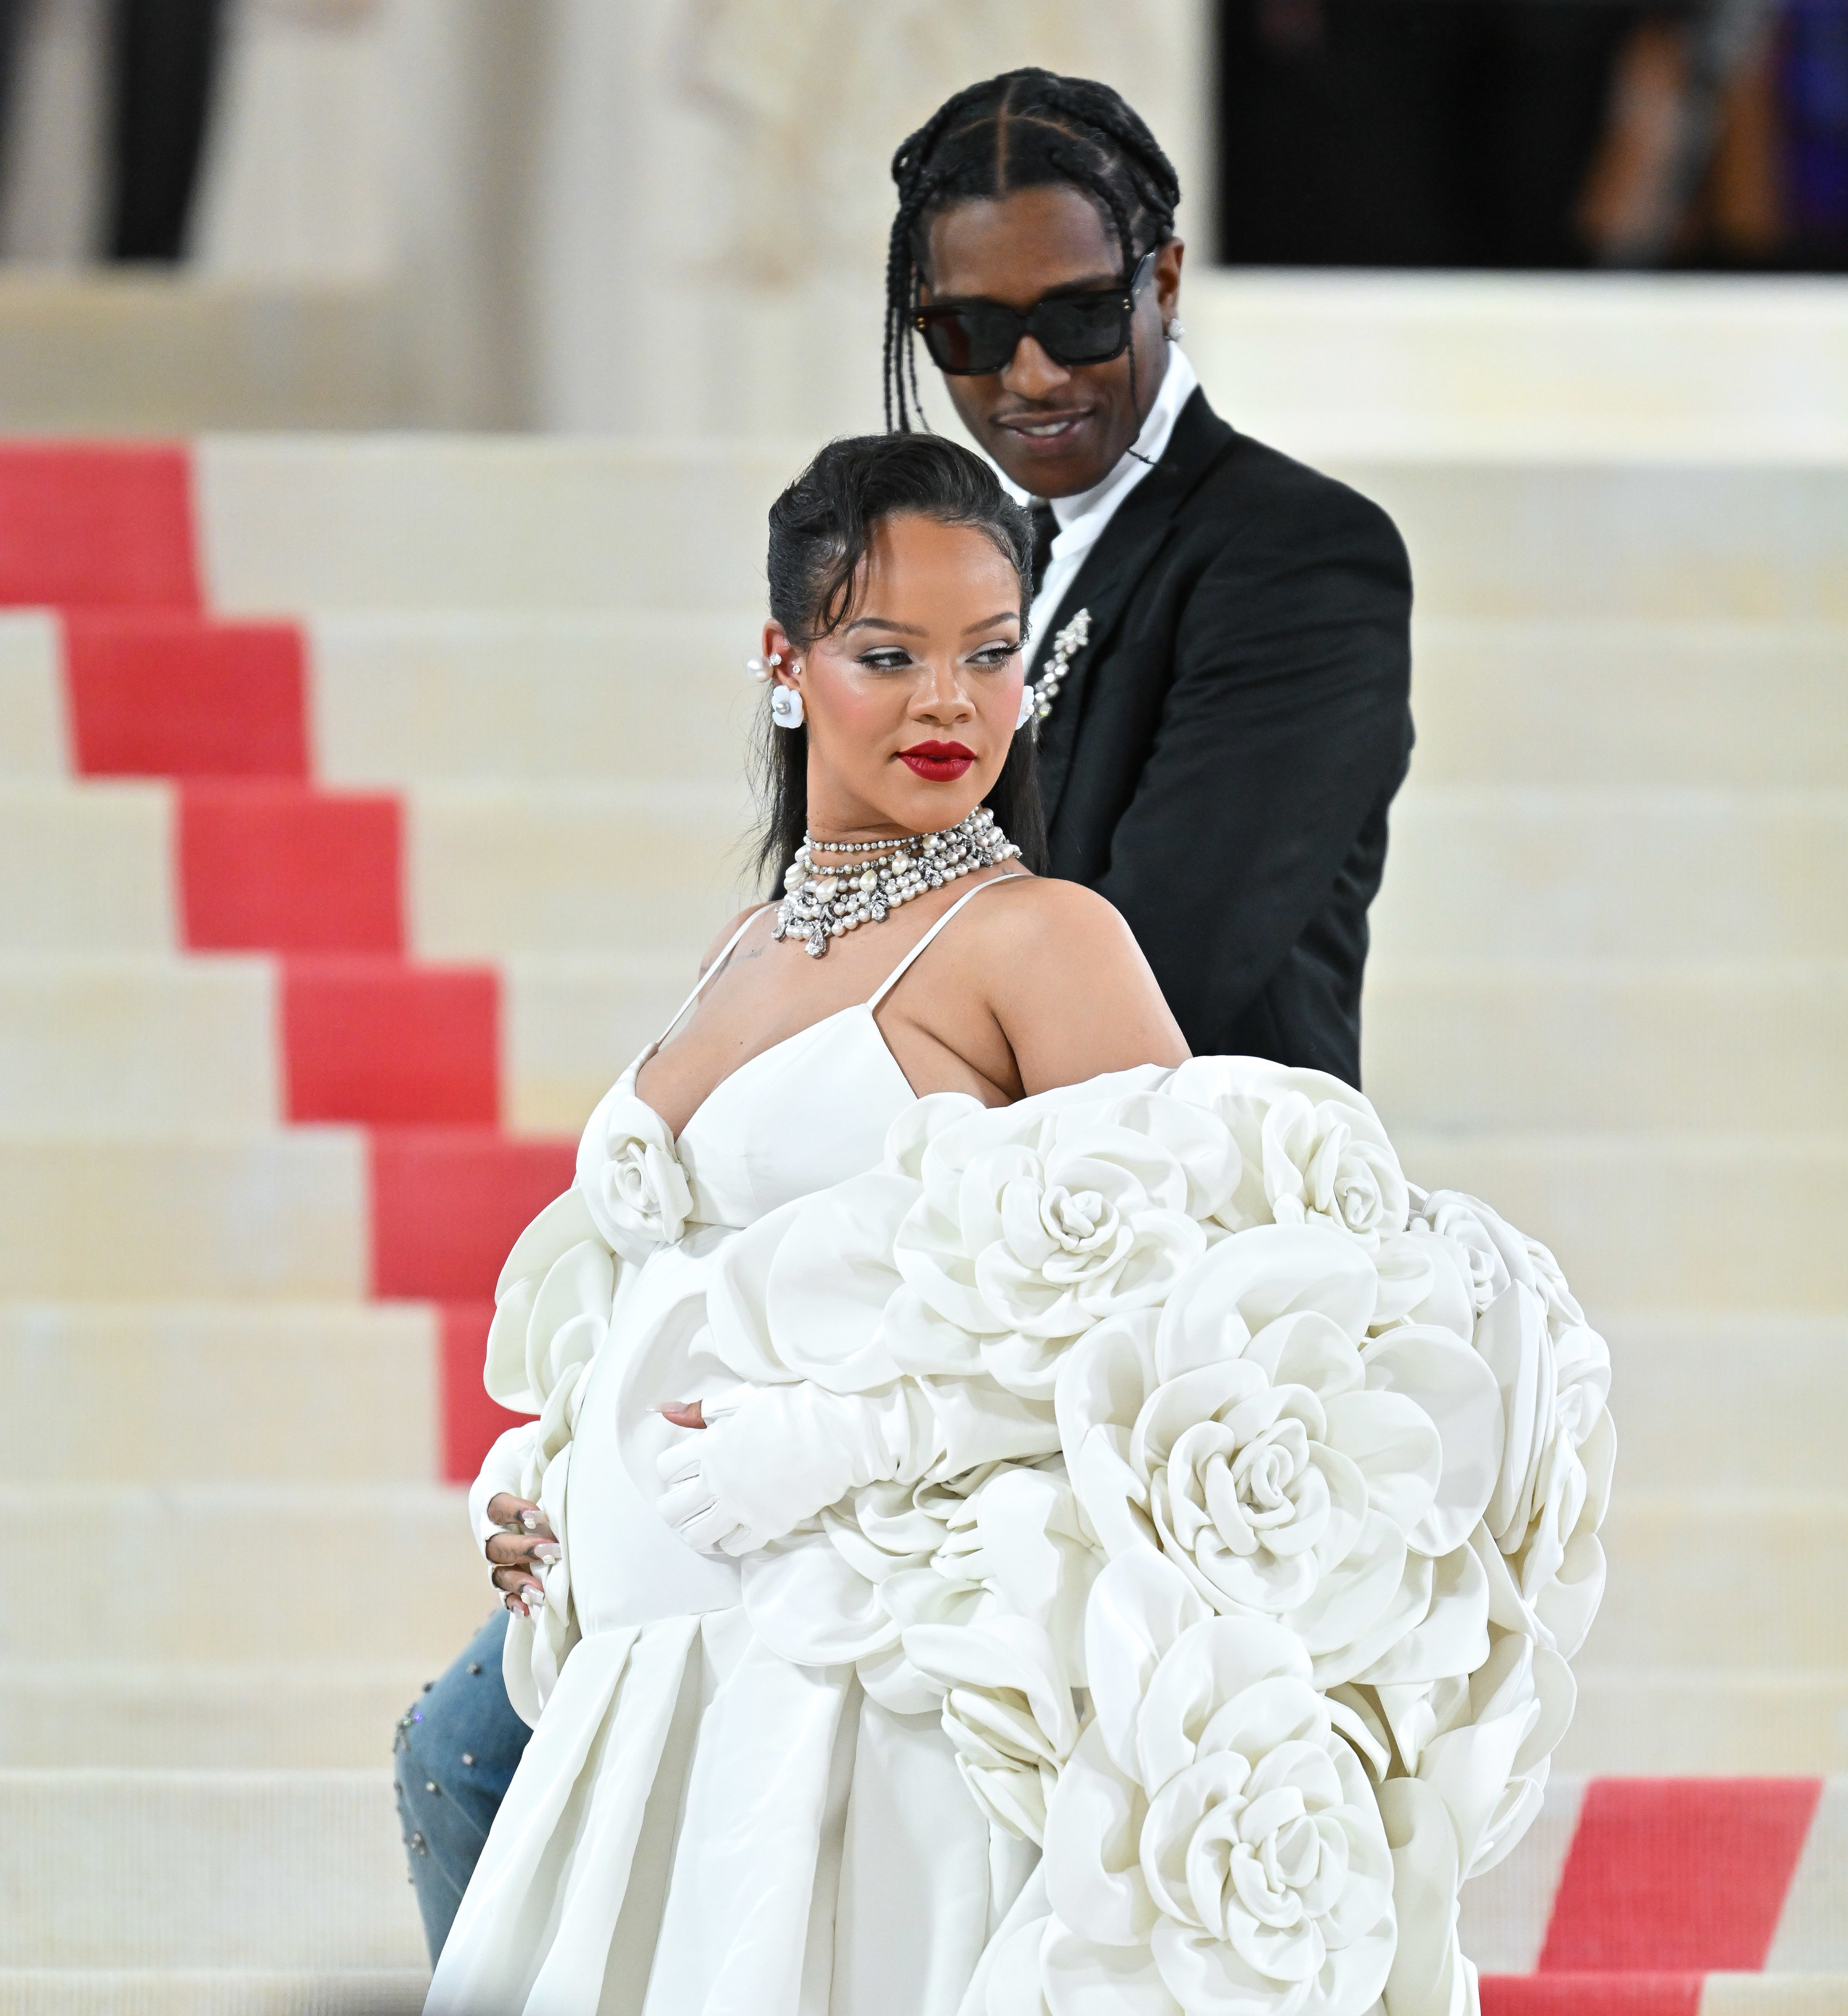 Rhianna poses in an extravagant evening gown on the steps of The Met prior to The Met Gala with A$AP Rocky standing behind peering down toward Rhianna from a few steps above